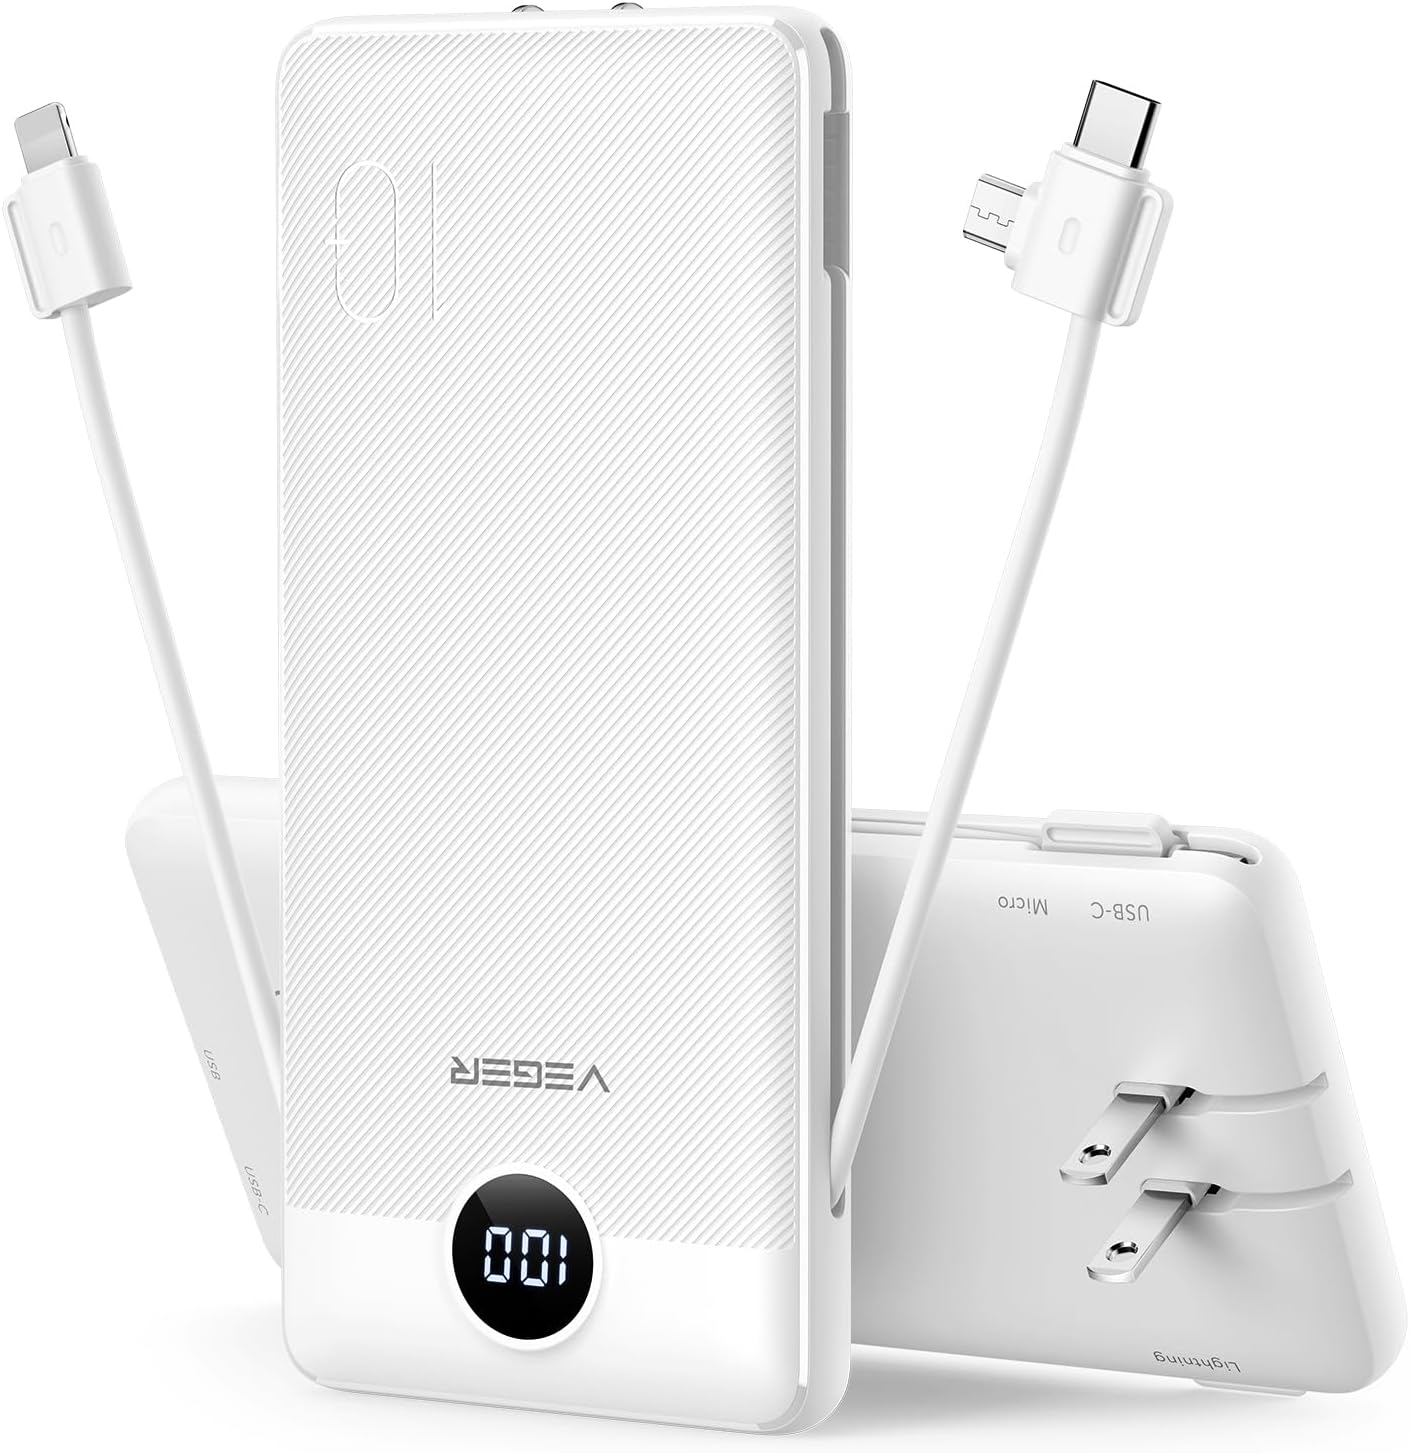 VEGER Portable Charger for iPhone Built in Cables and Wall Plug